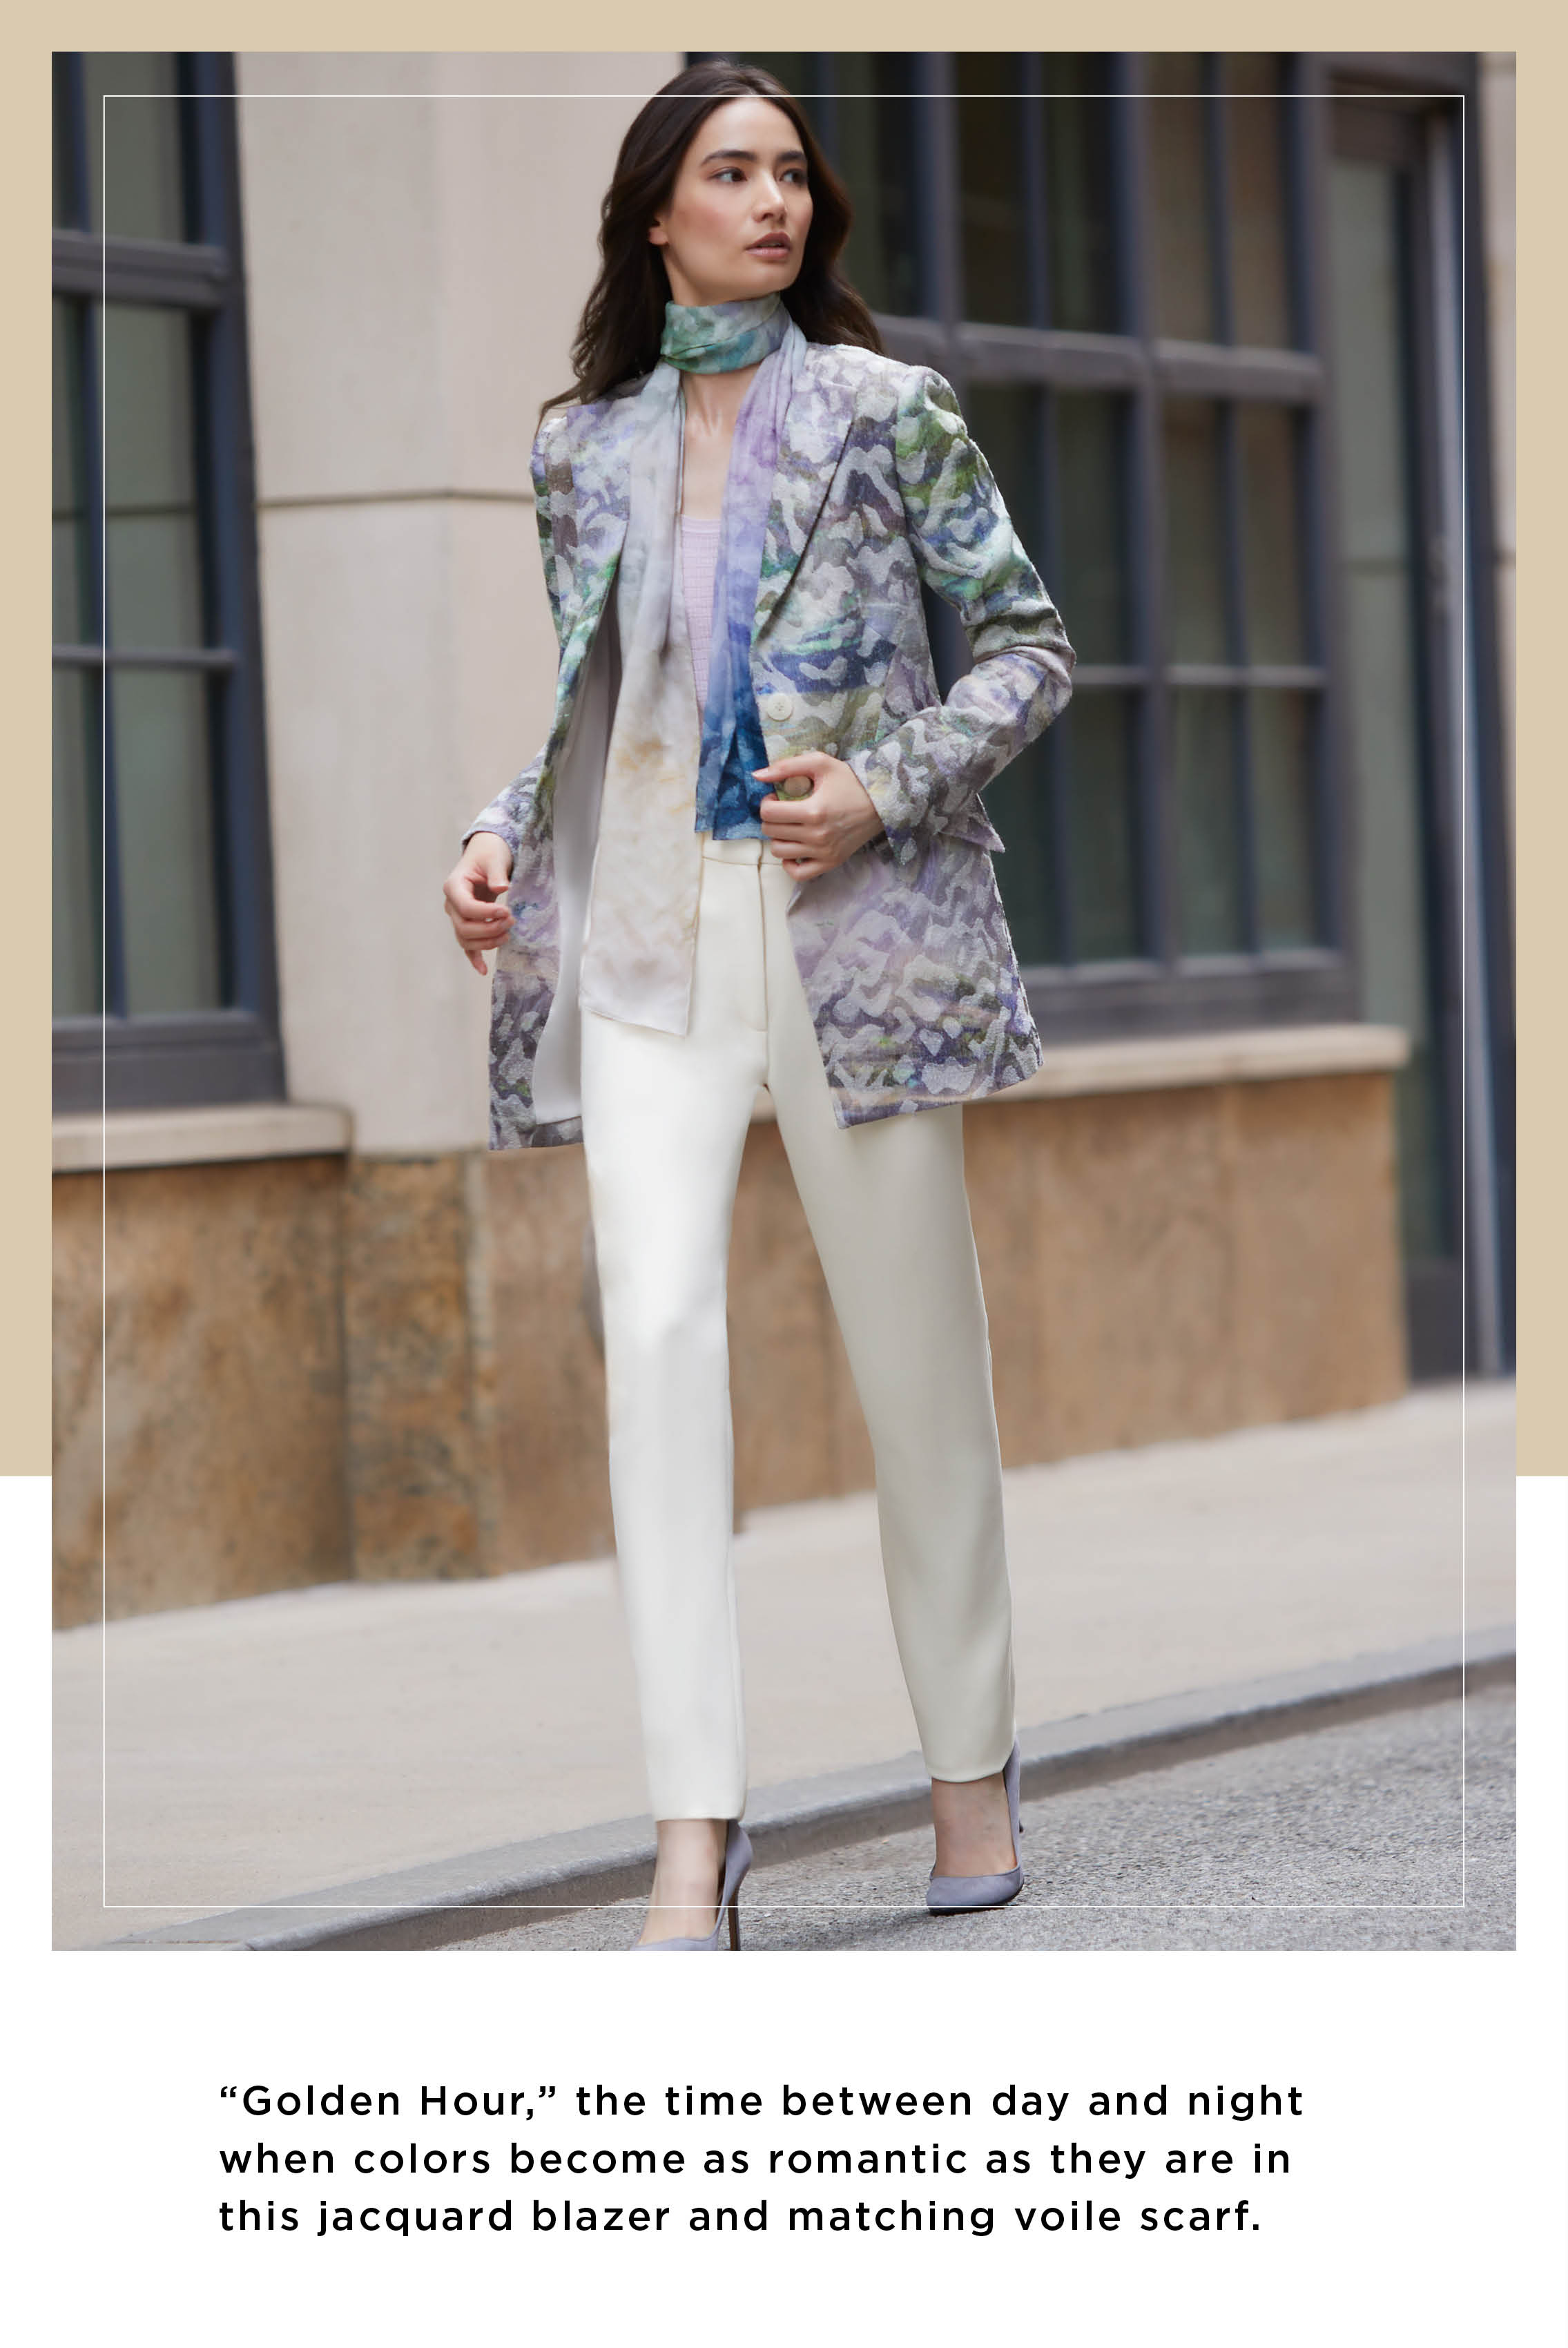 The winter theme is “Golden Hour,” the time between day and night when colors become as romantic as they are in this jacquard blazer and matching voile scarf.